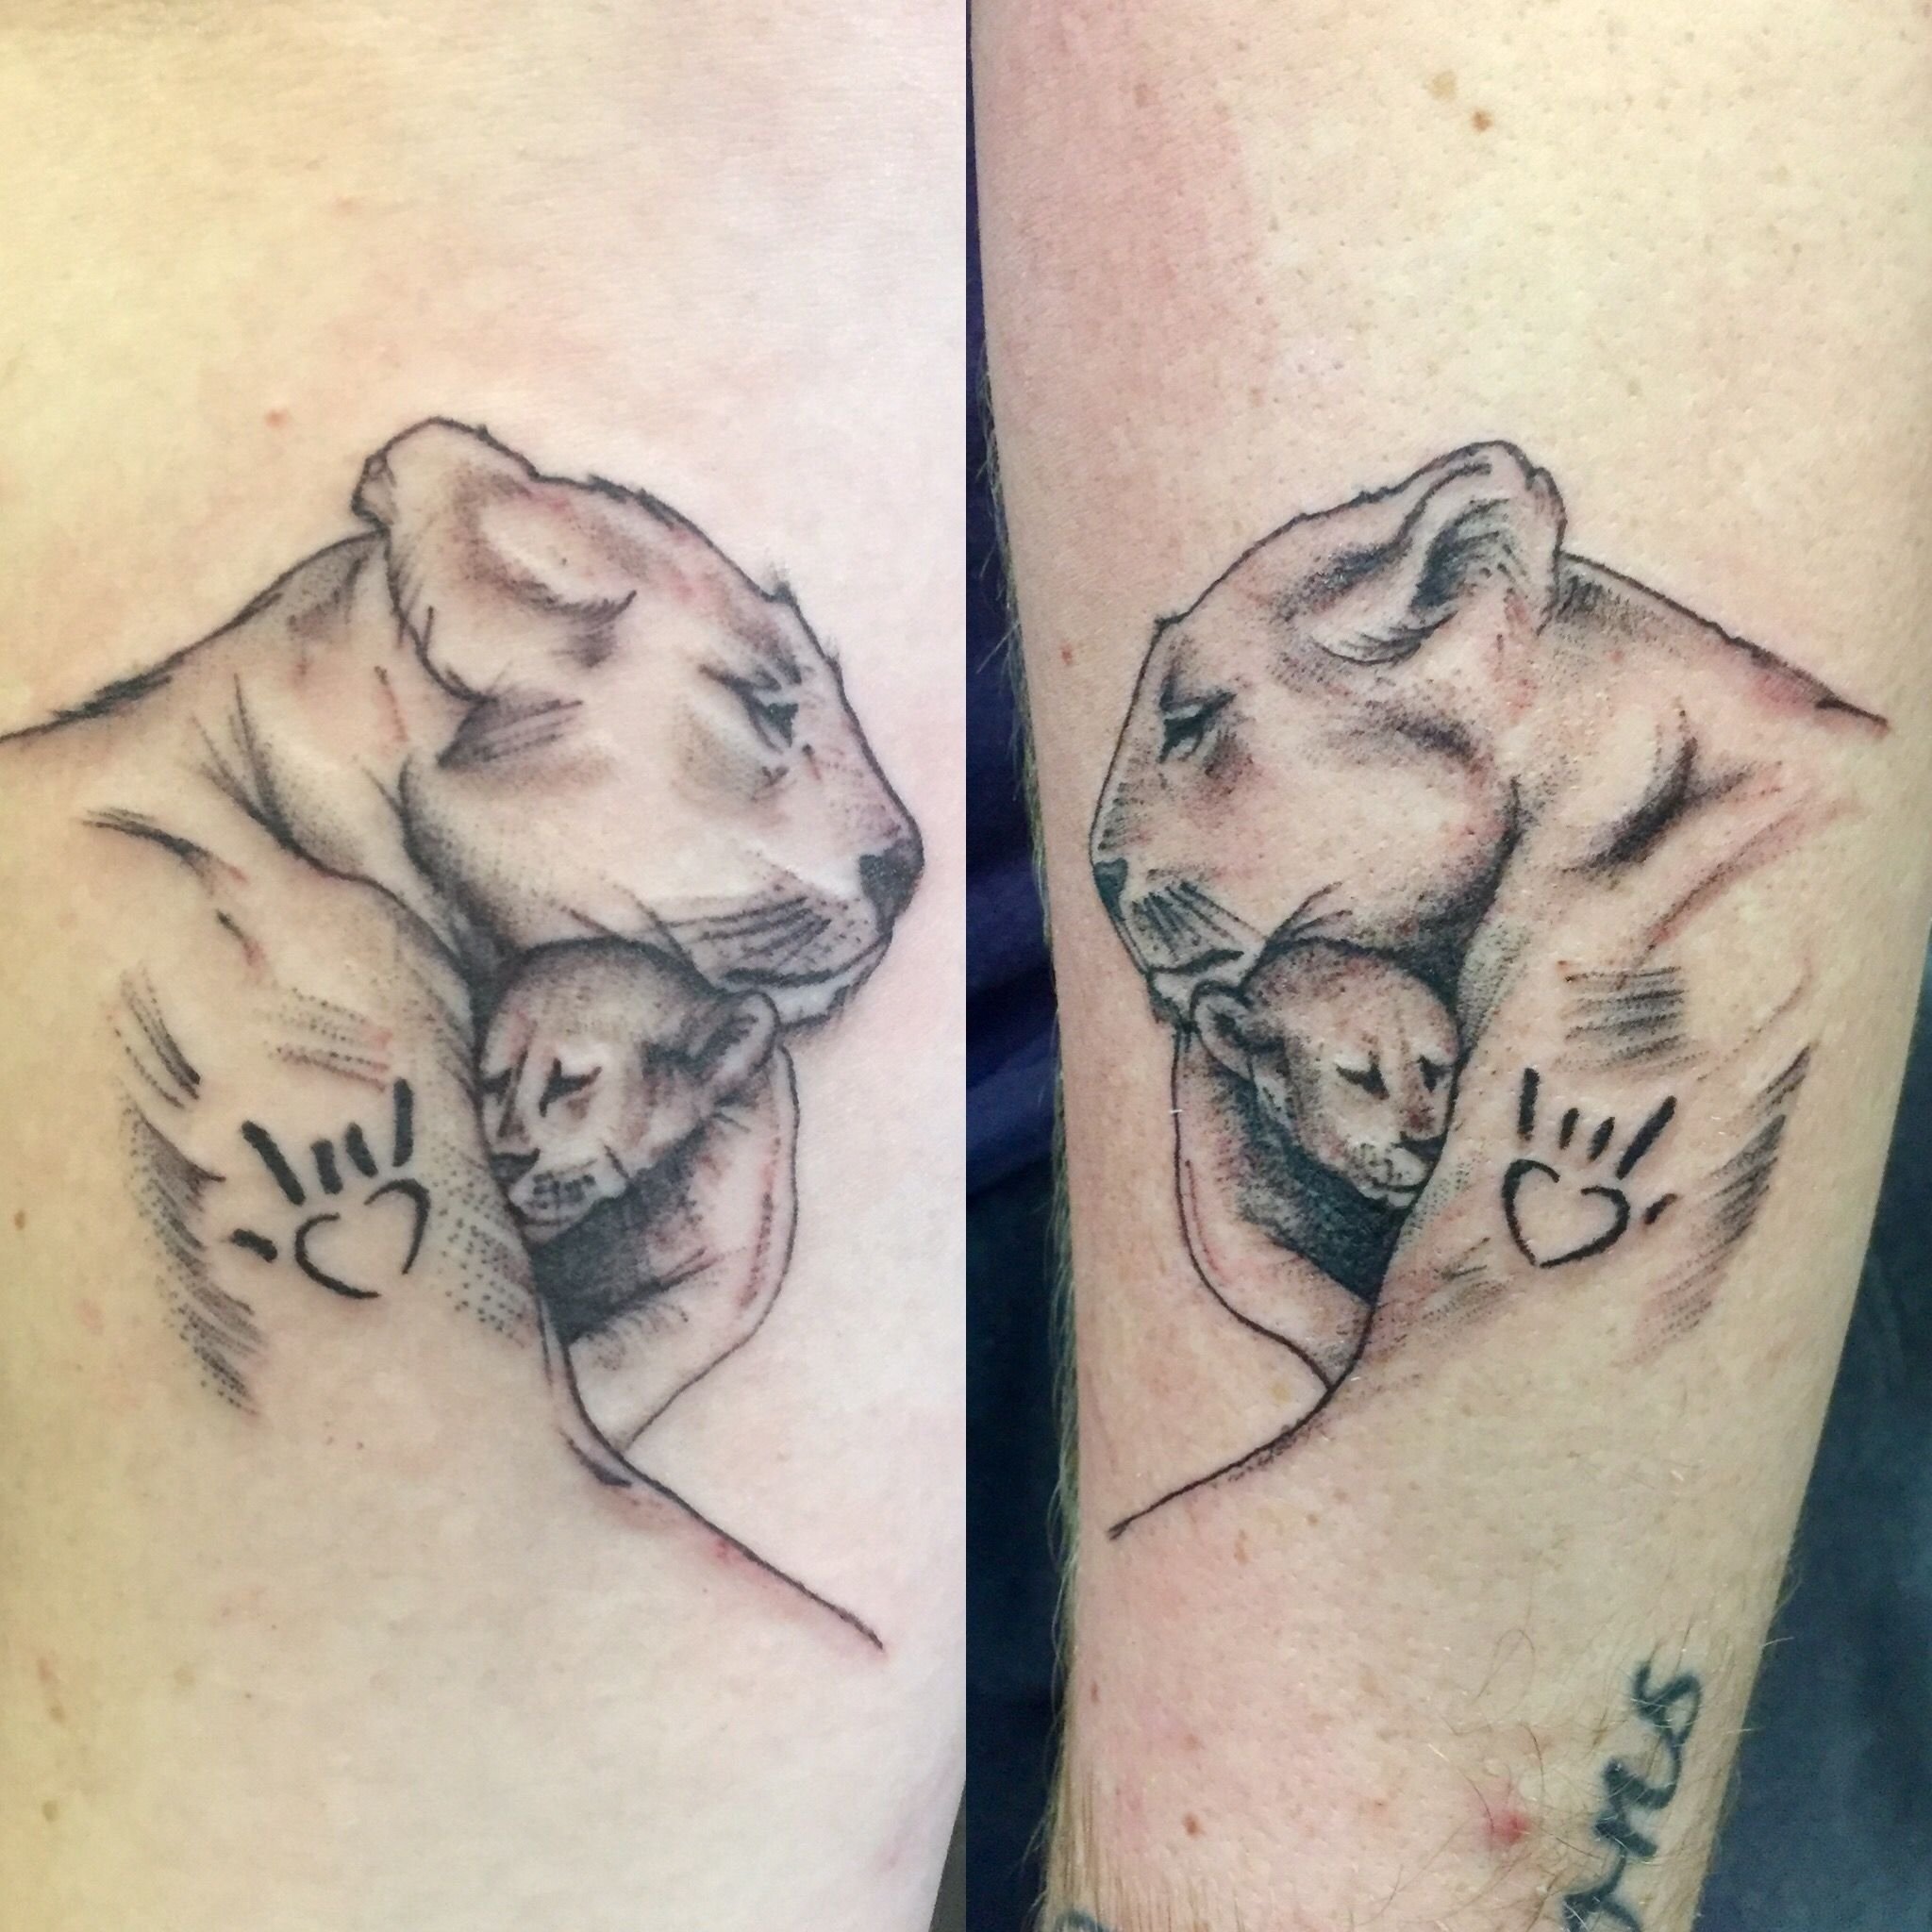 10 Most Popular Mom And Son Tattoo Ideas mother son tattoo mama lion and cub with sign language for i love 1 2023